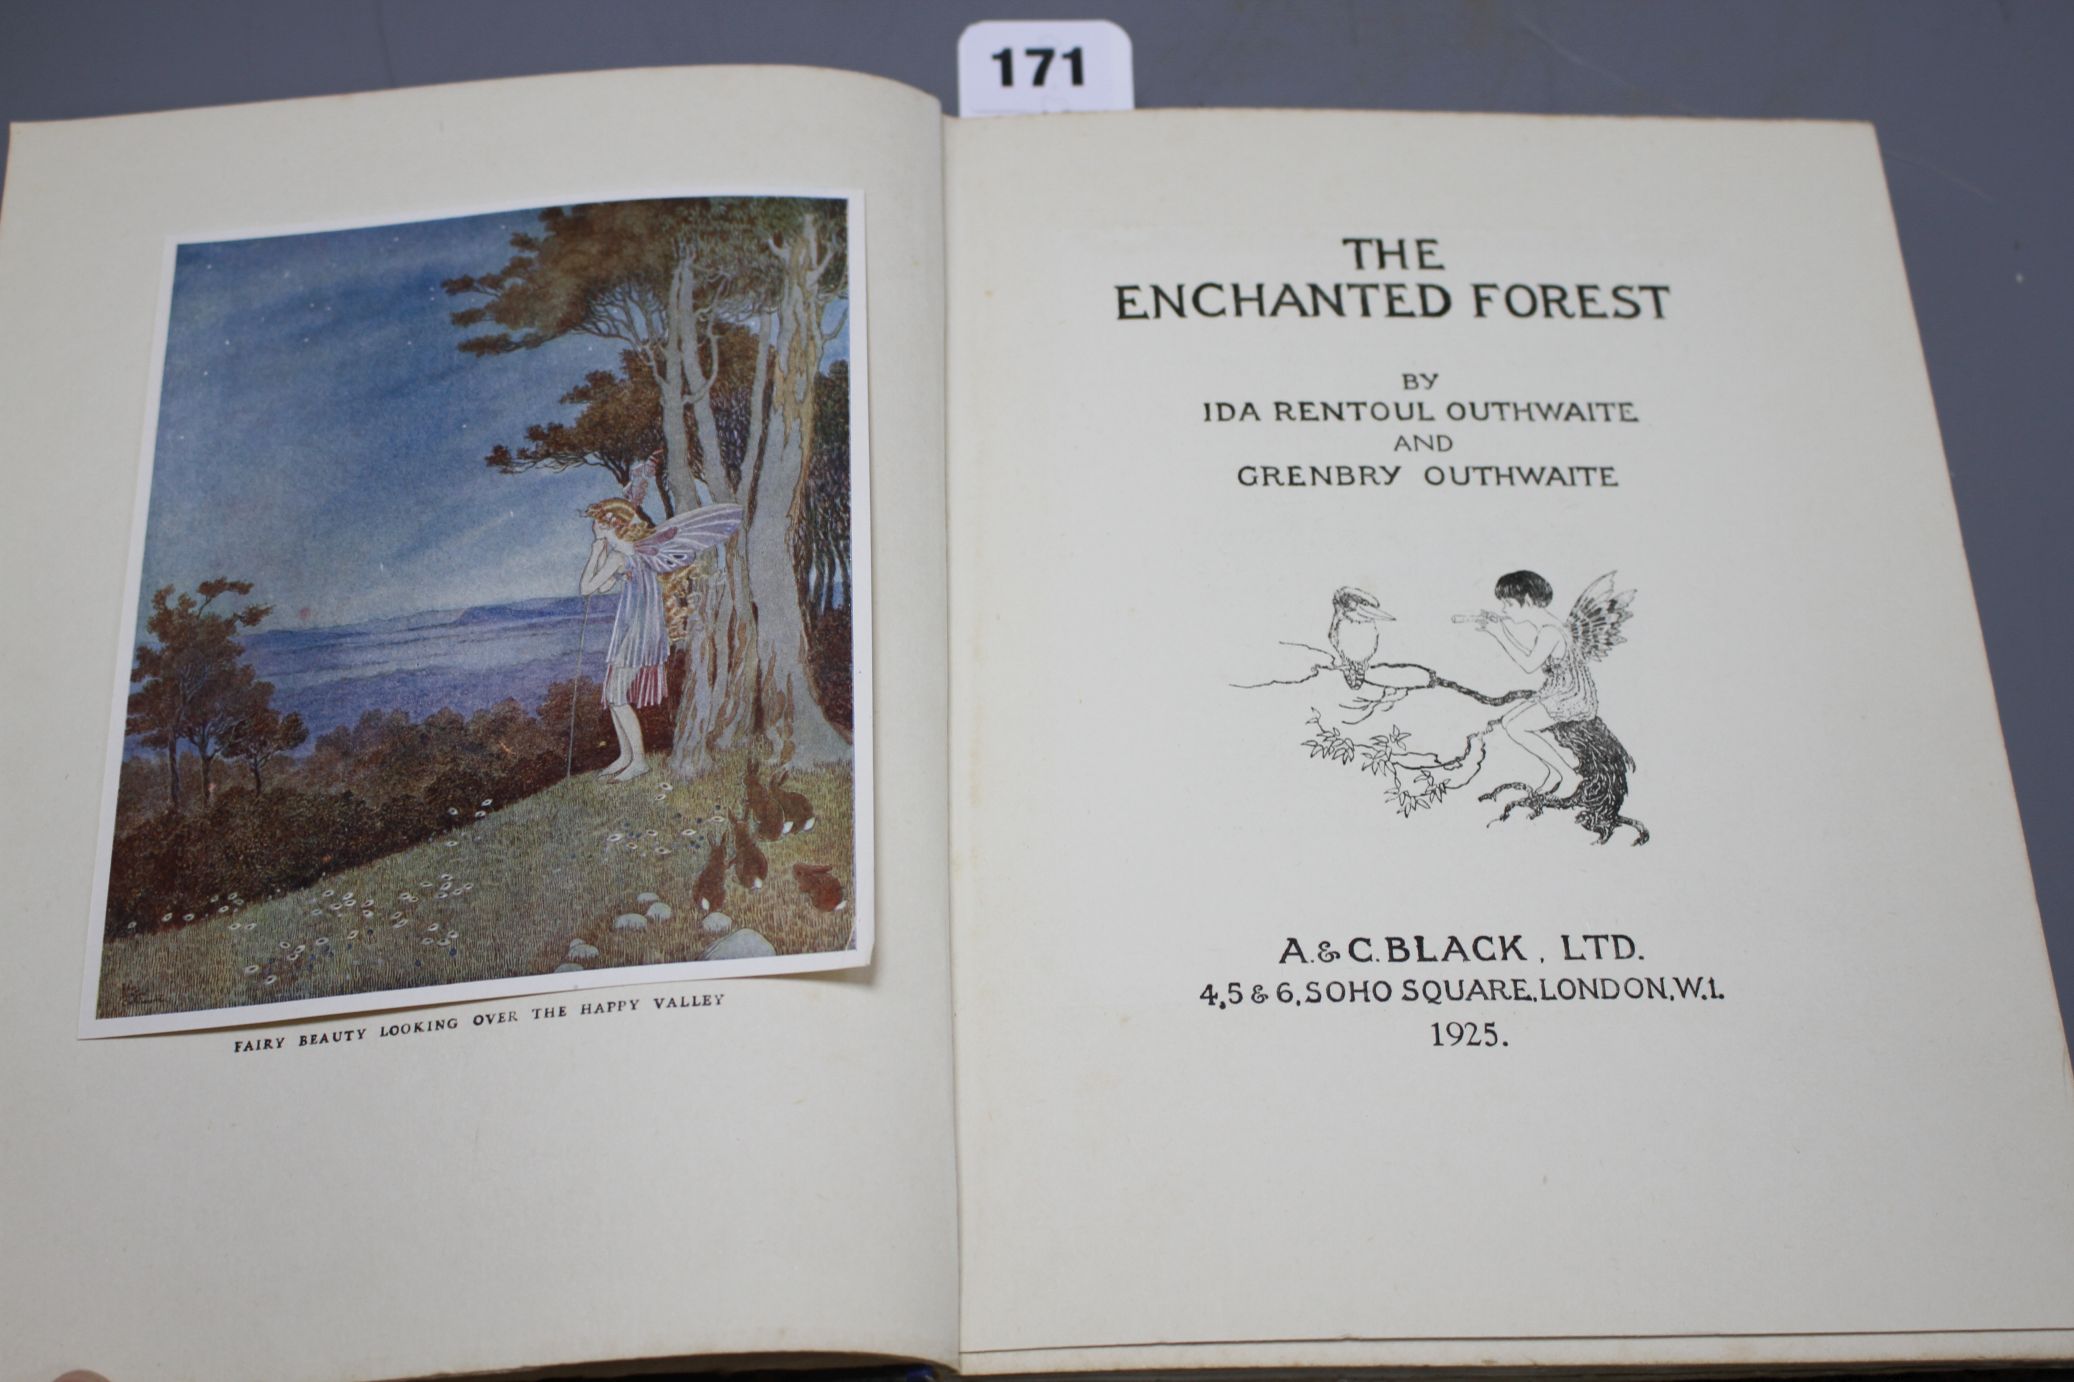 Outhwaite, Ida and Grenbry - The Enchanted Forest, A & C Black Ltd 1925 Condition: good condition - Image 6 of 8